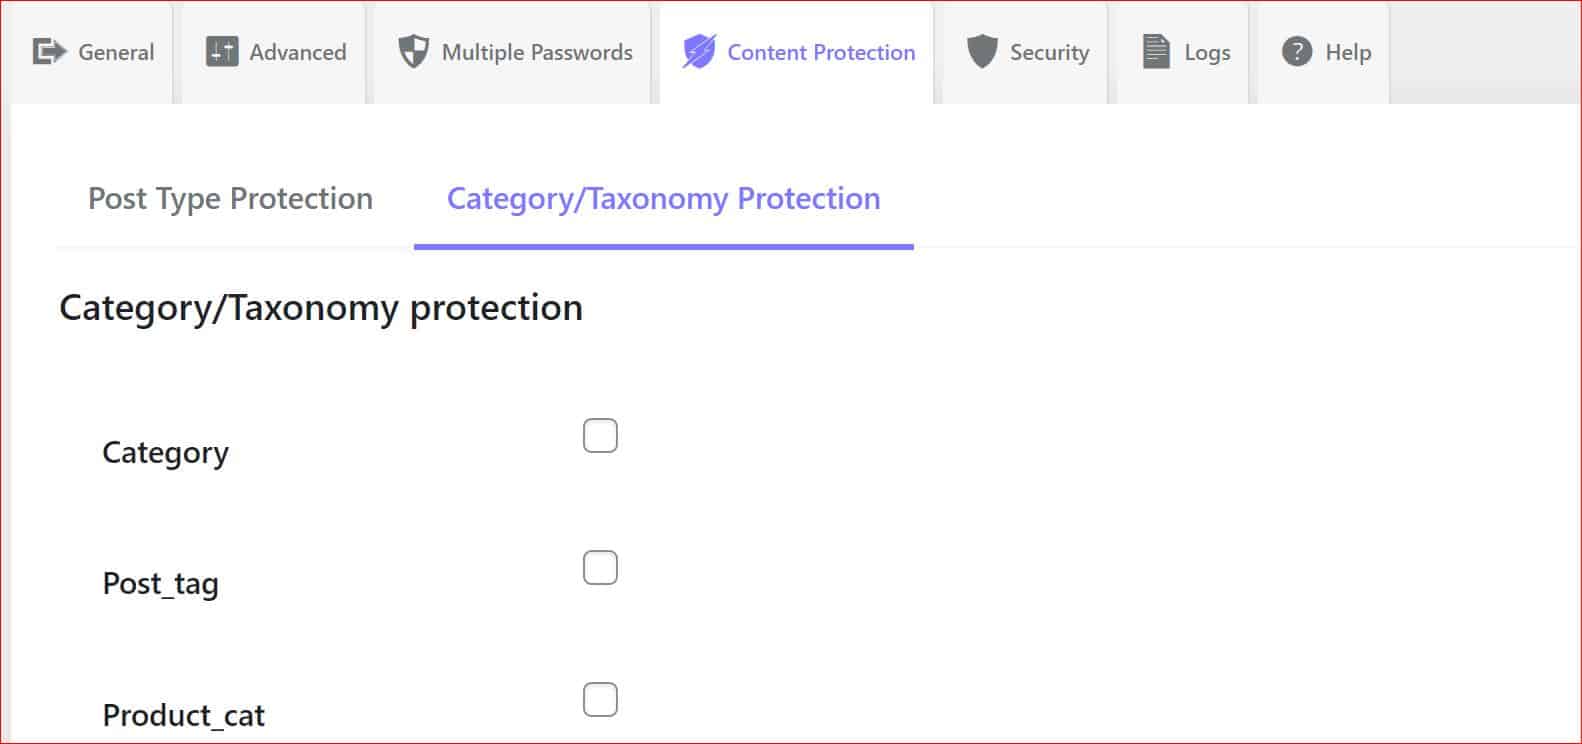 Category/Taxonomy Protection